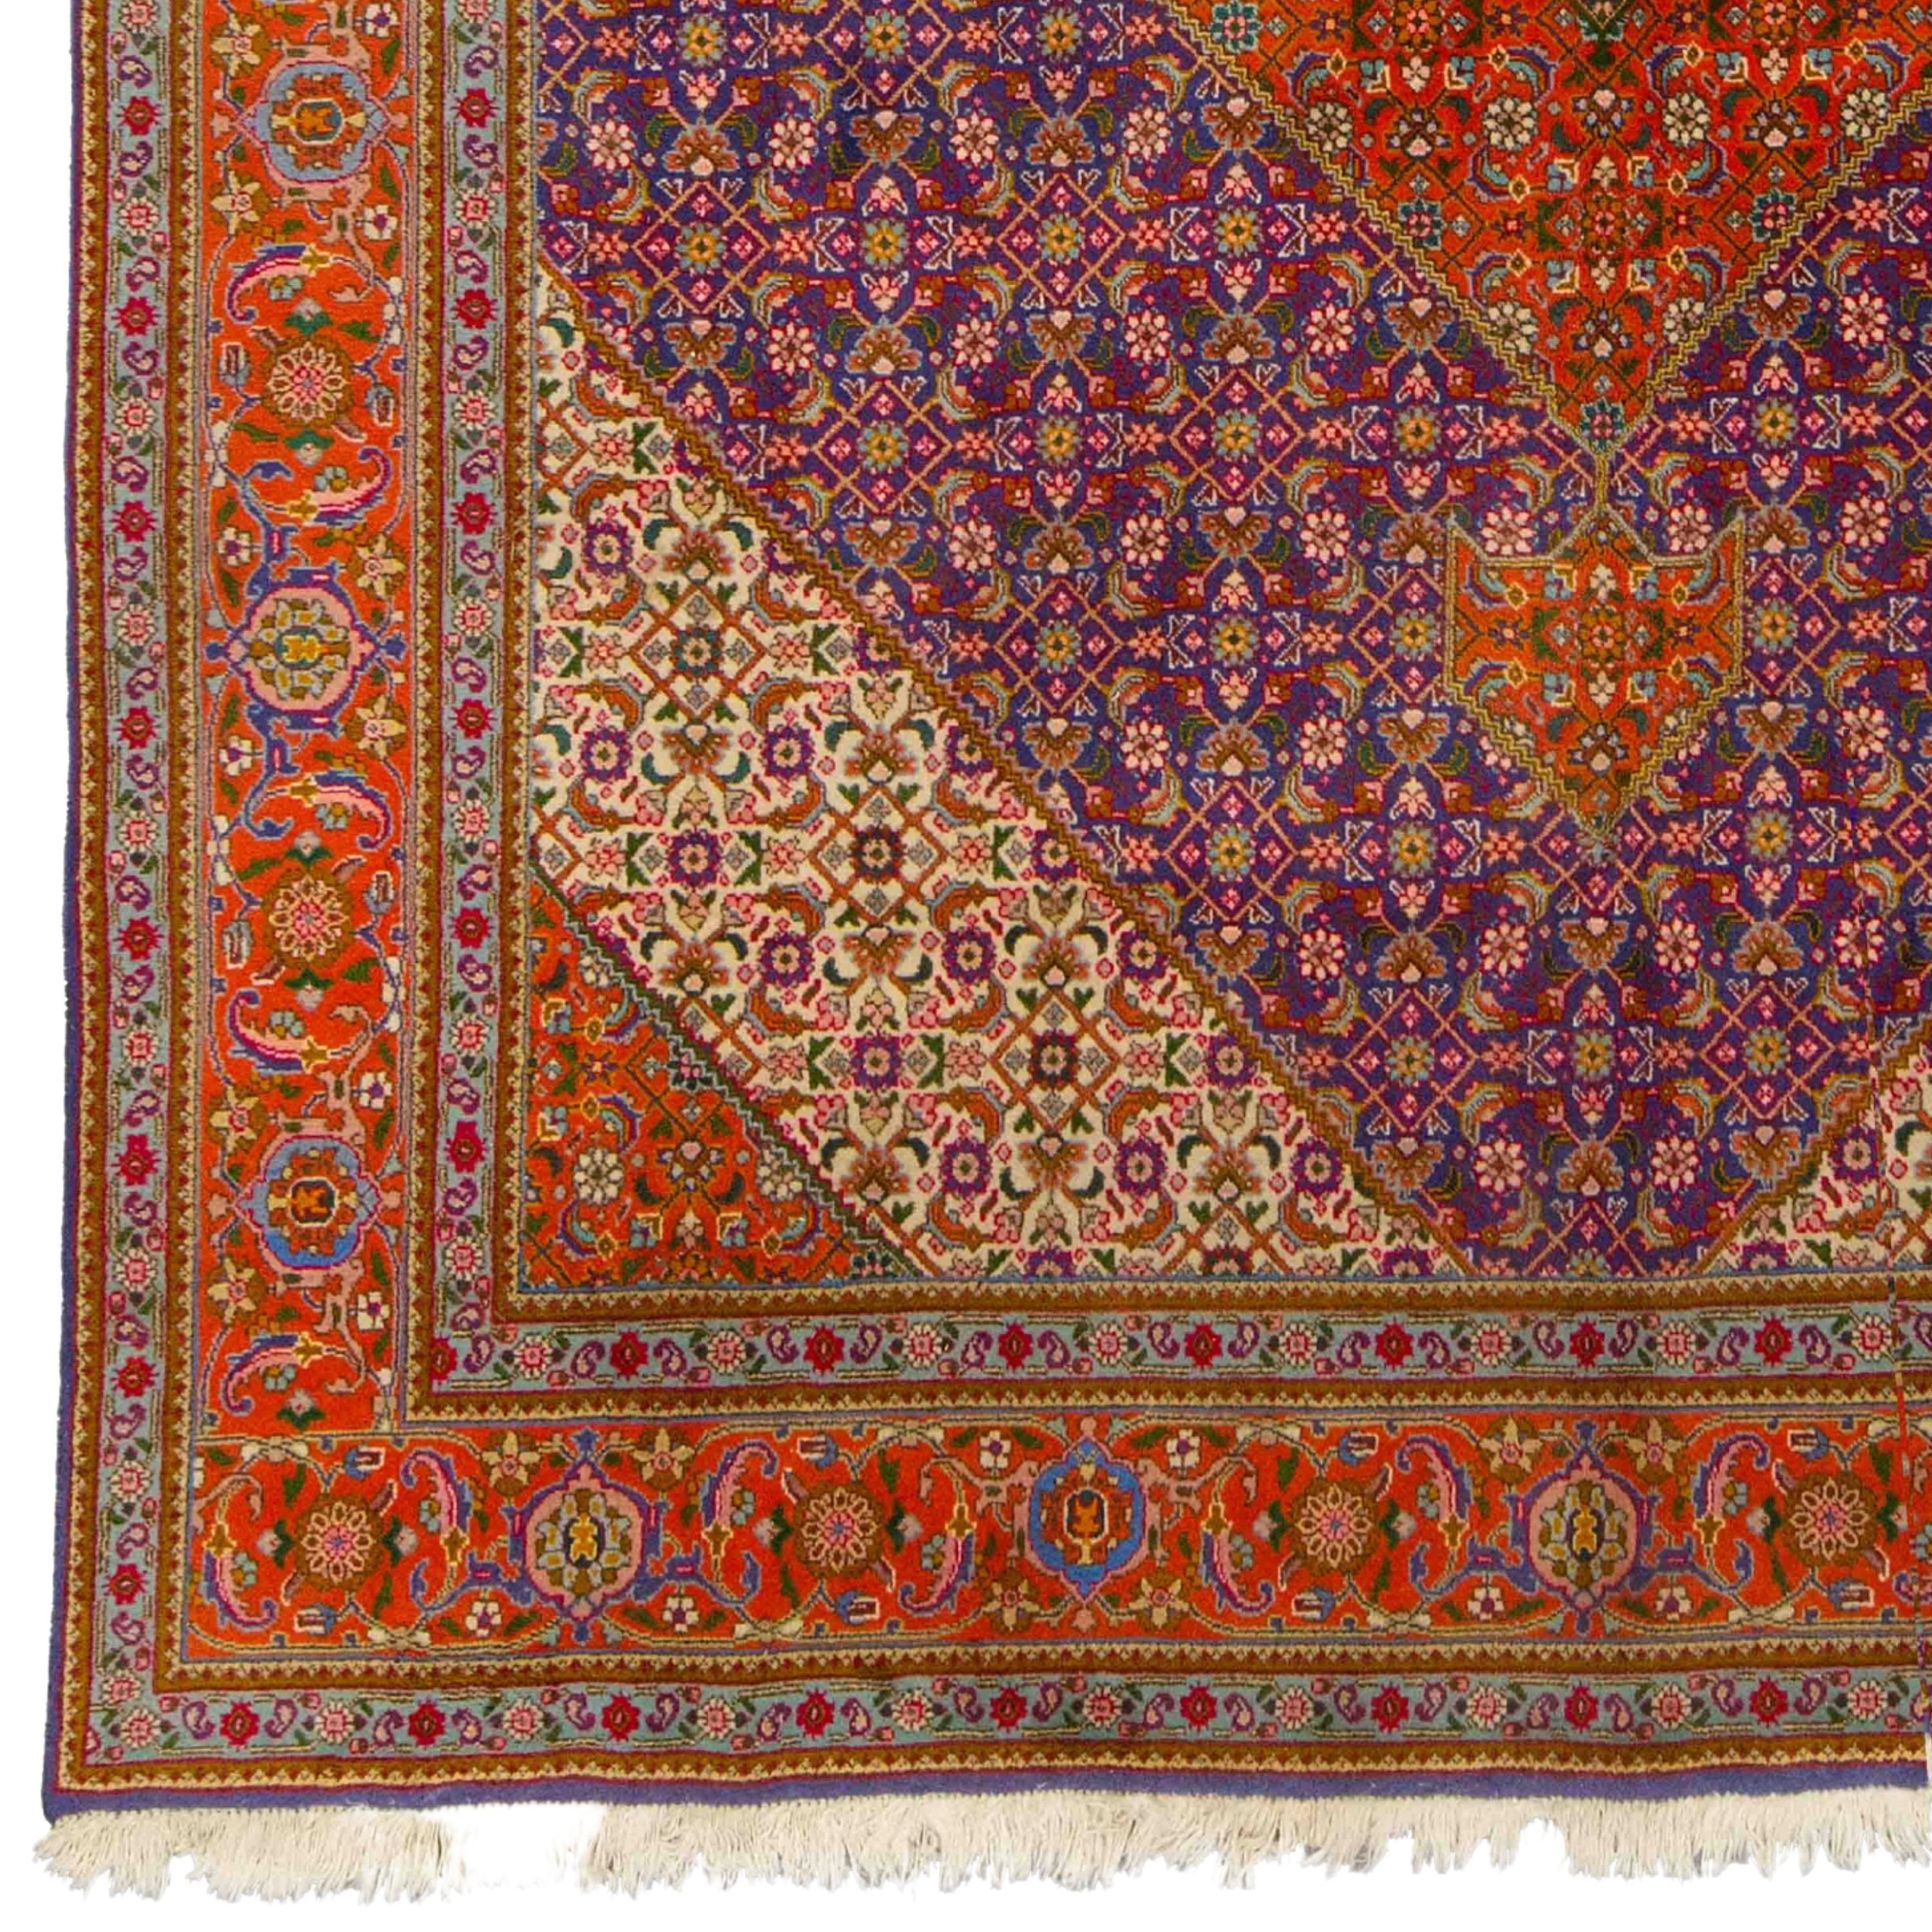 Antique Tabriz Rug 253x340 cm (8,30 x 11,15 ft) Late of 19th Century Tebriz Rug

From the mid-19th century, there was a revival in commercial carpet production in Azerbaijan, and Tabriz became one of the country's most important centers producing